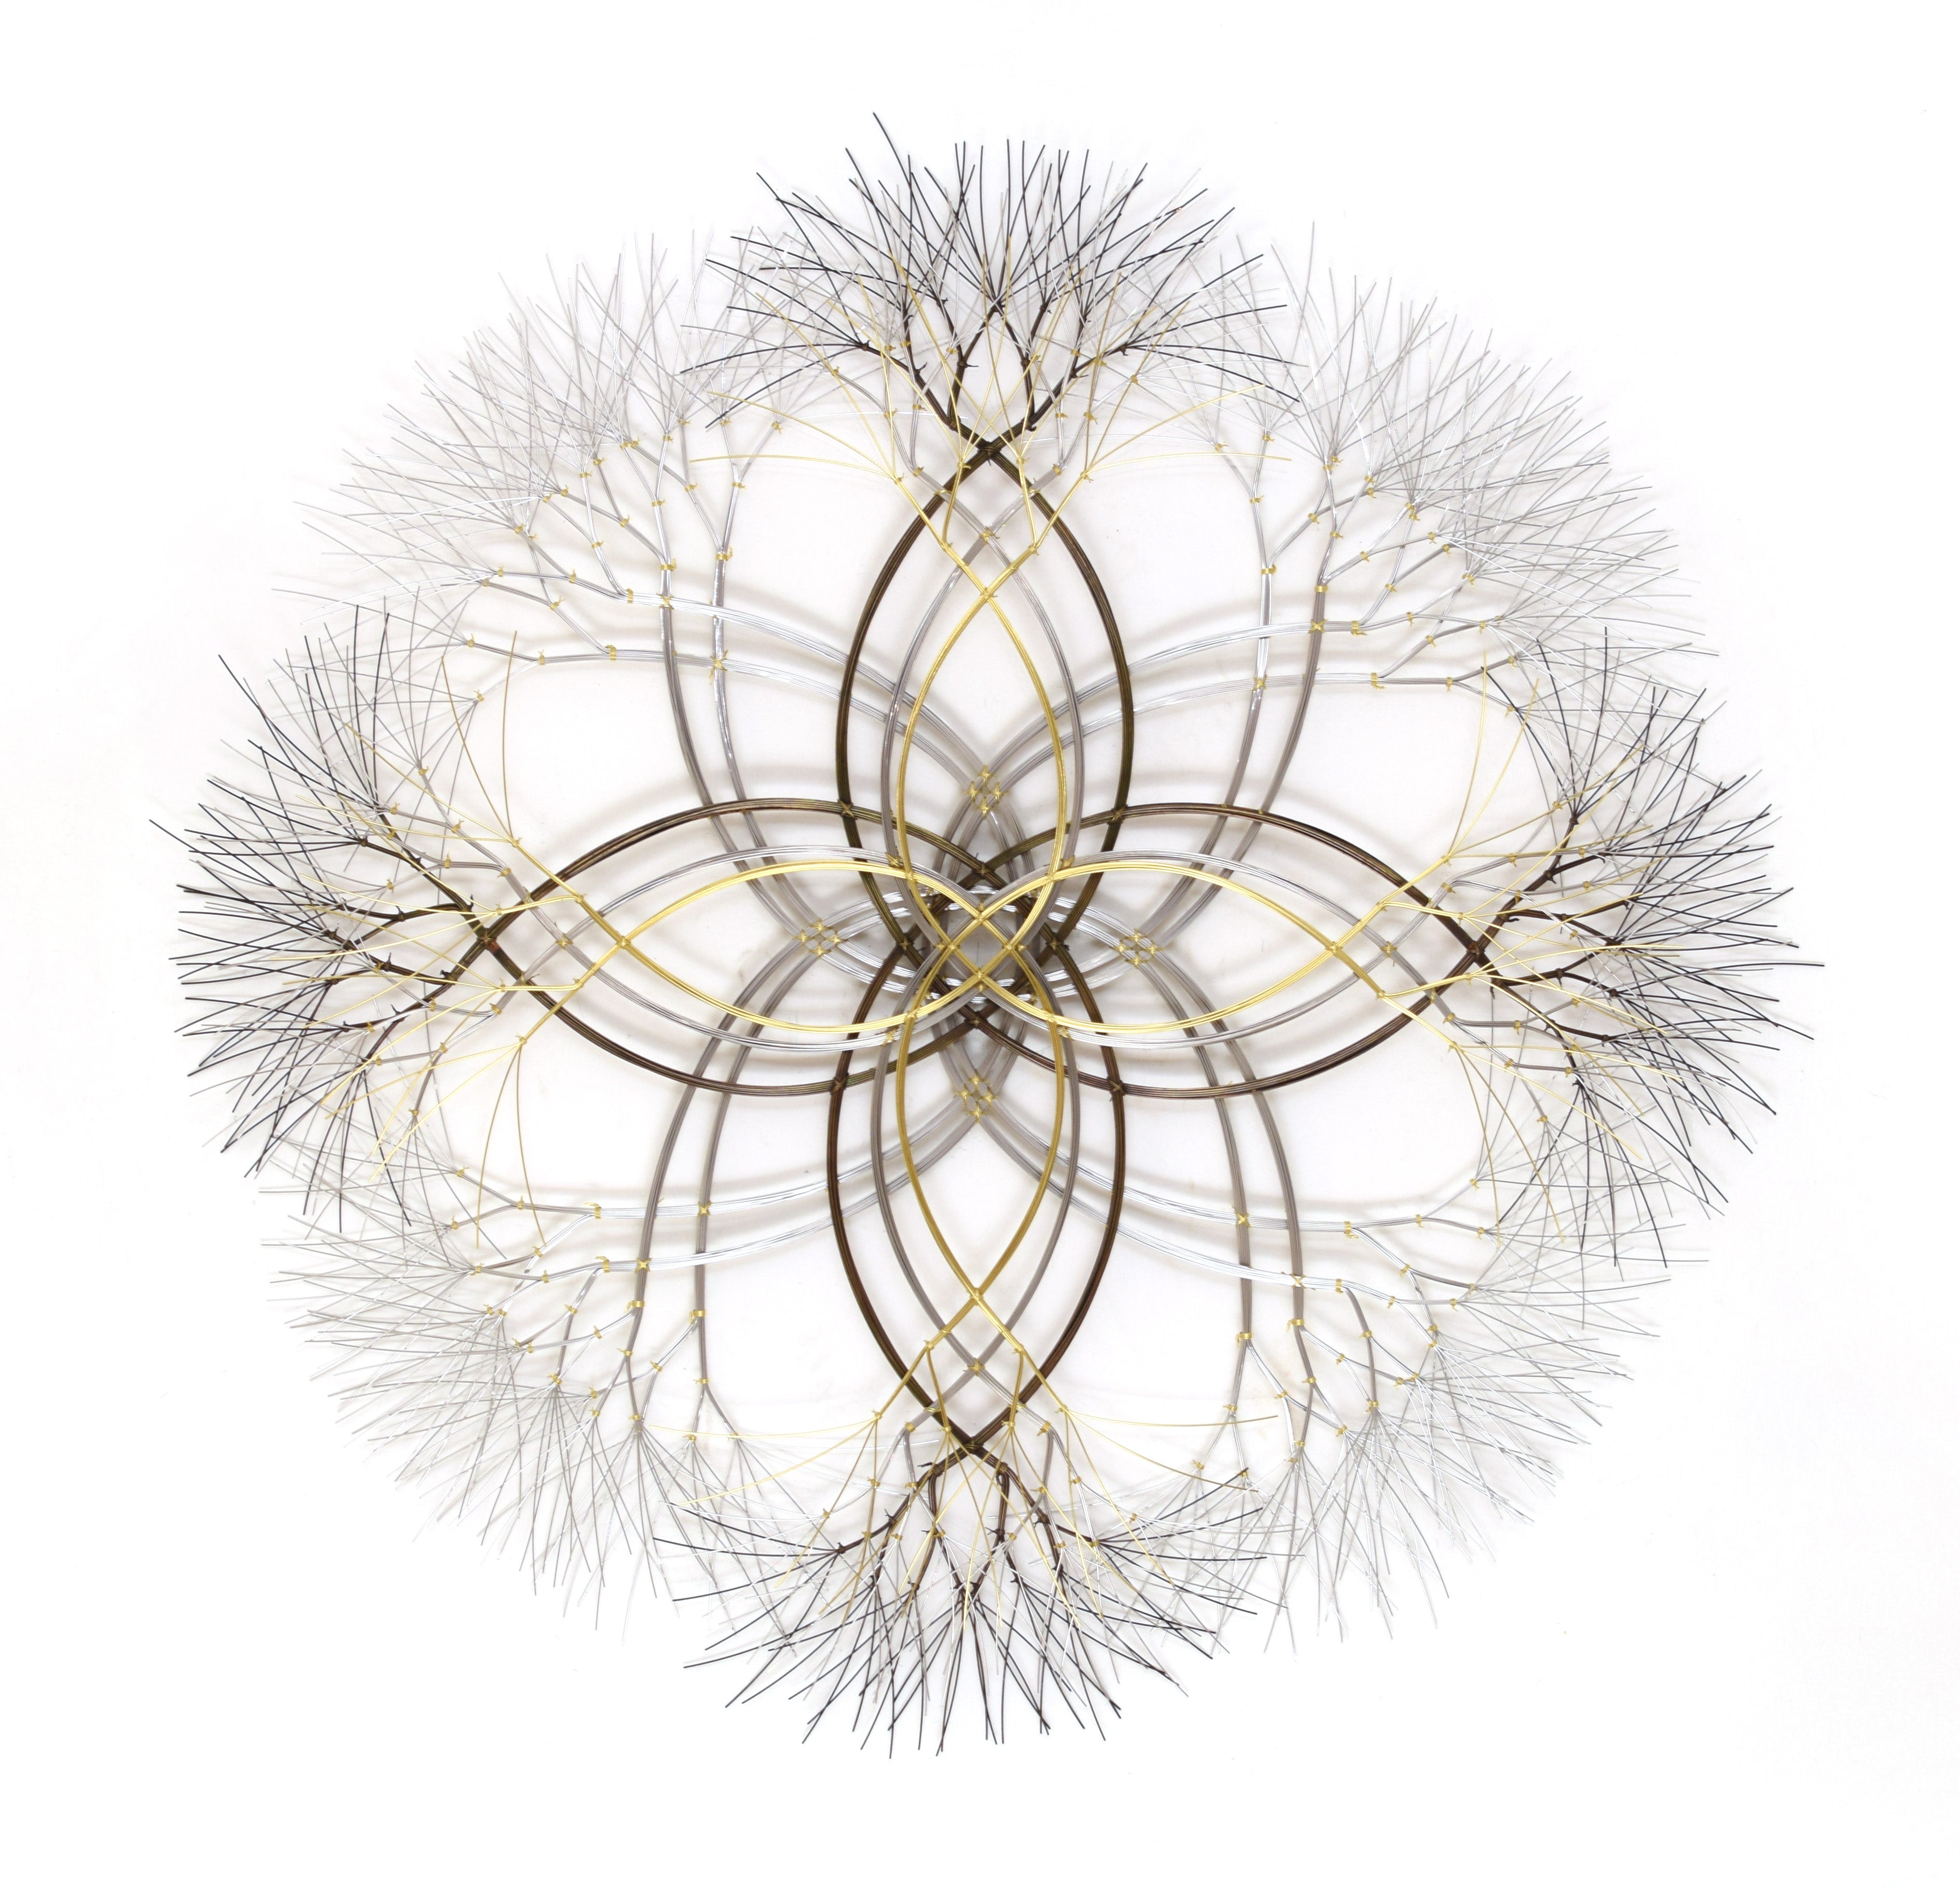 44"x44" Metal Wall Sculpture in Brass, Stainless, and Bronze #638. Available Now